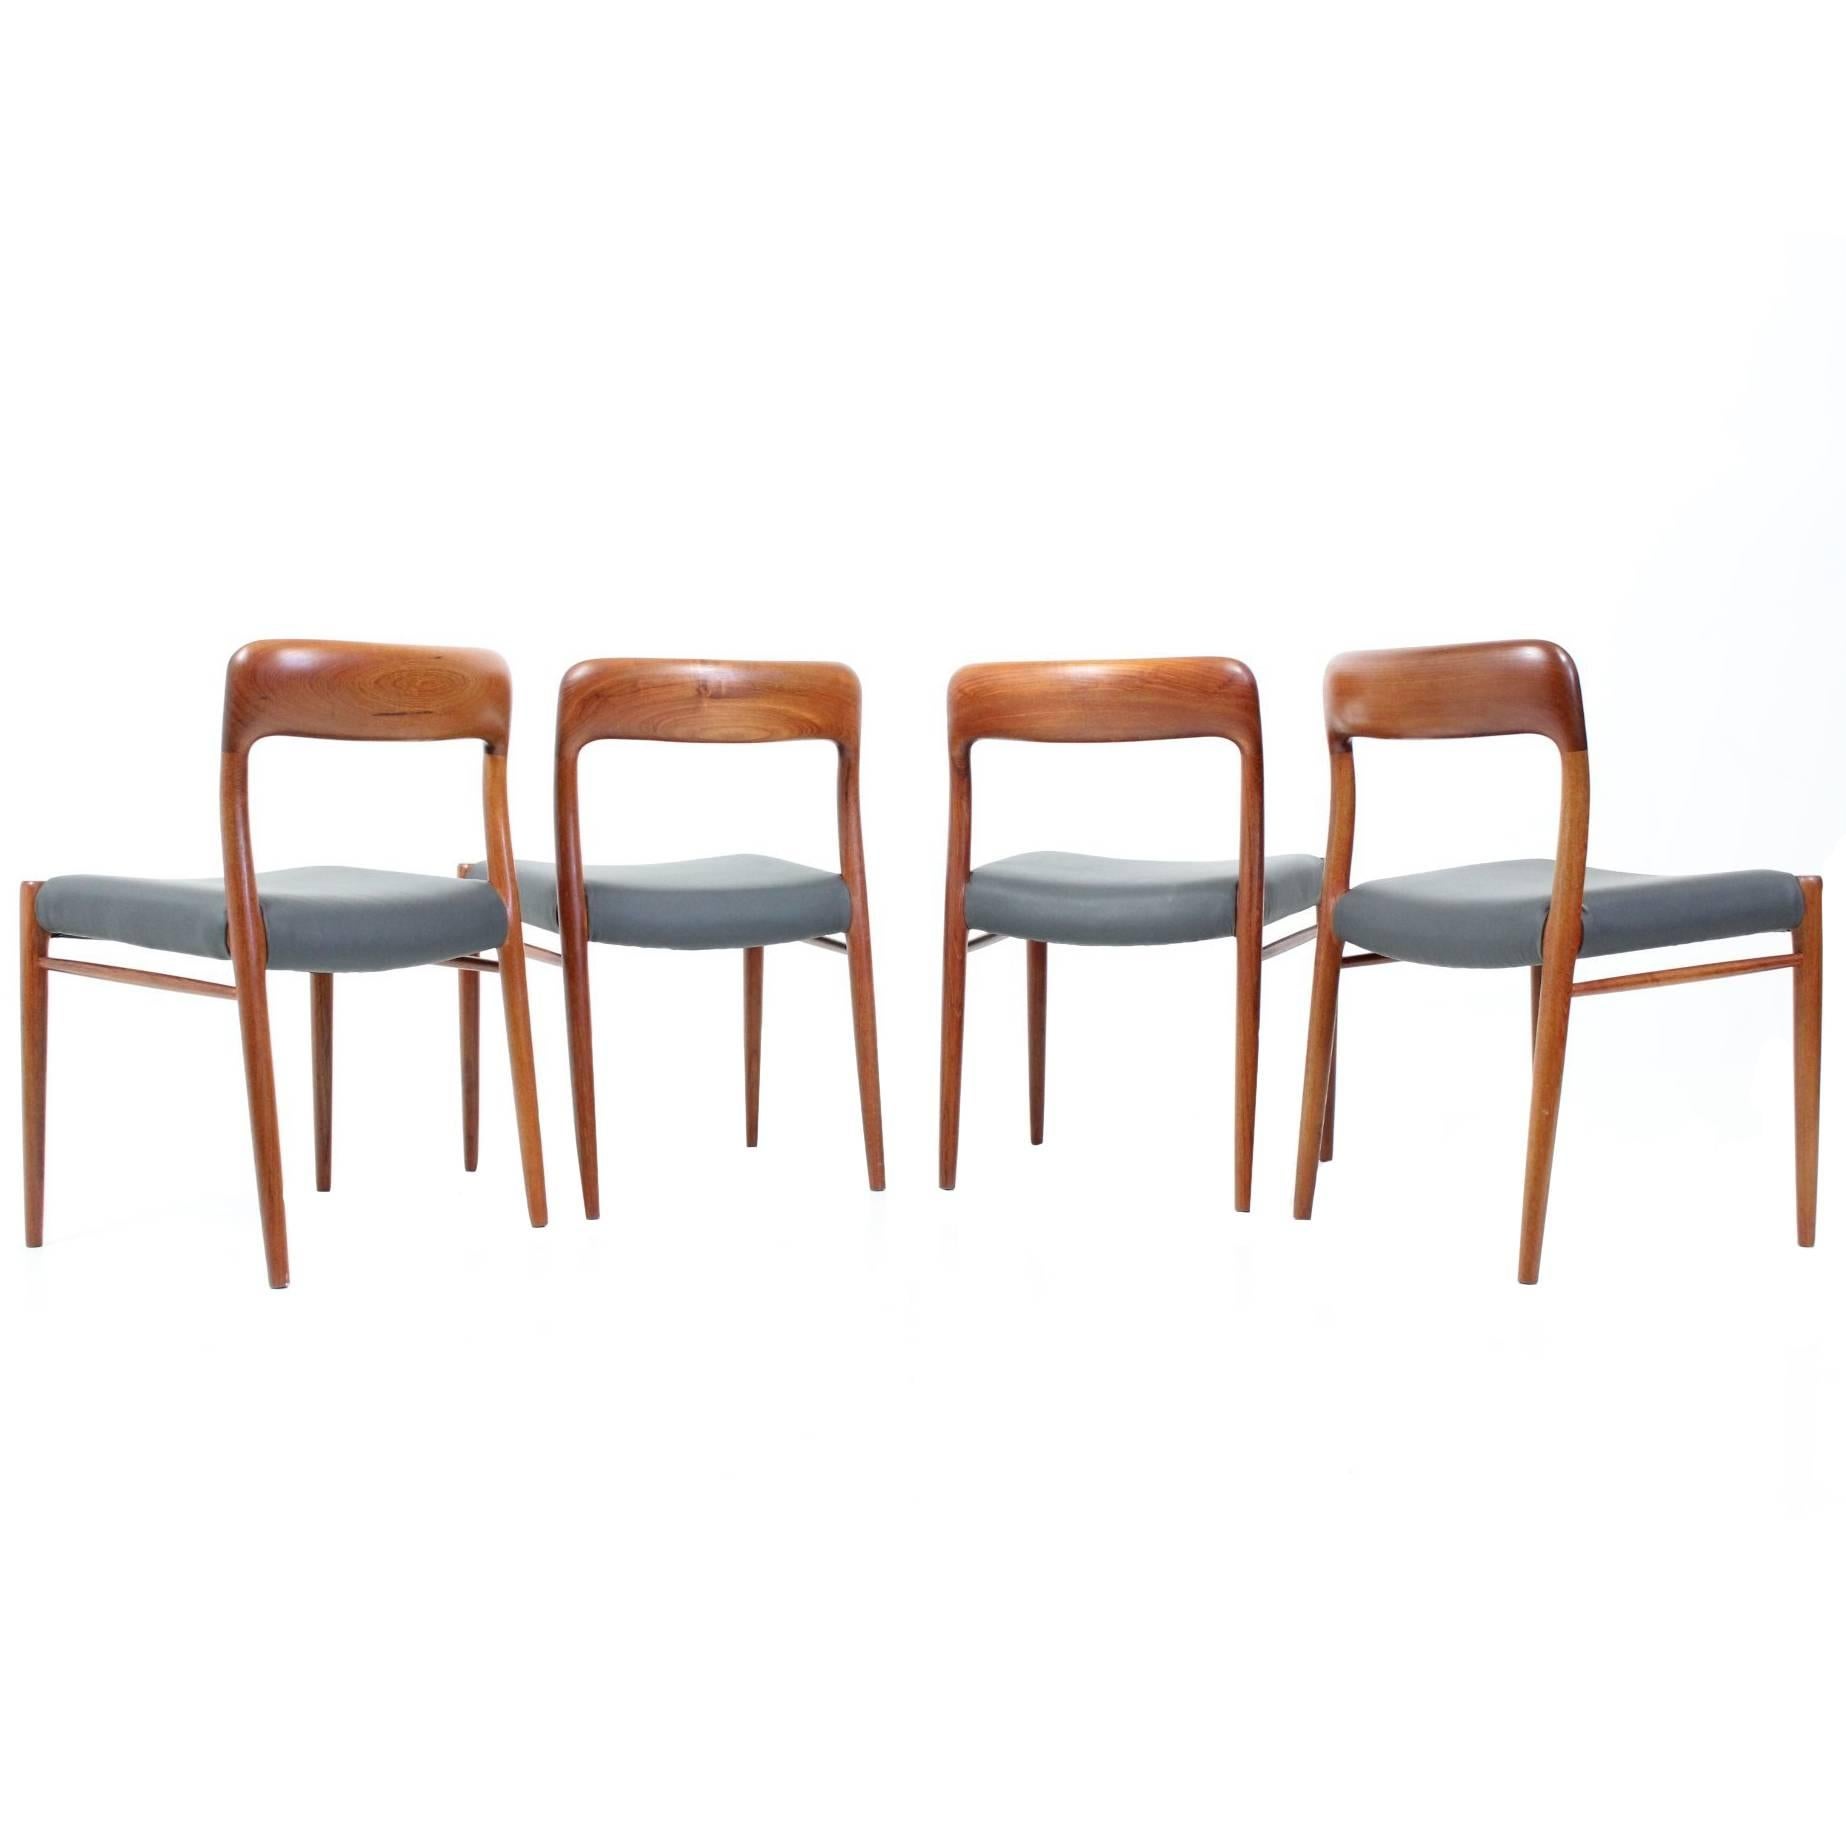 Set of Four Teak Dining Chairs Model 75 by Niels O. Møller